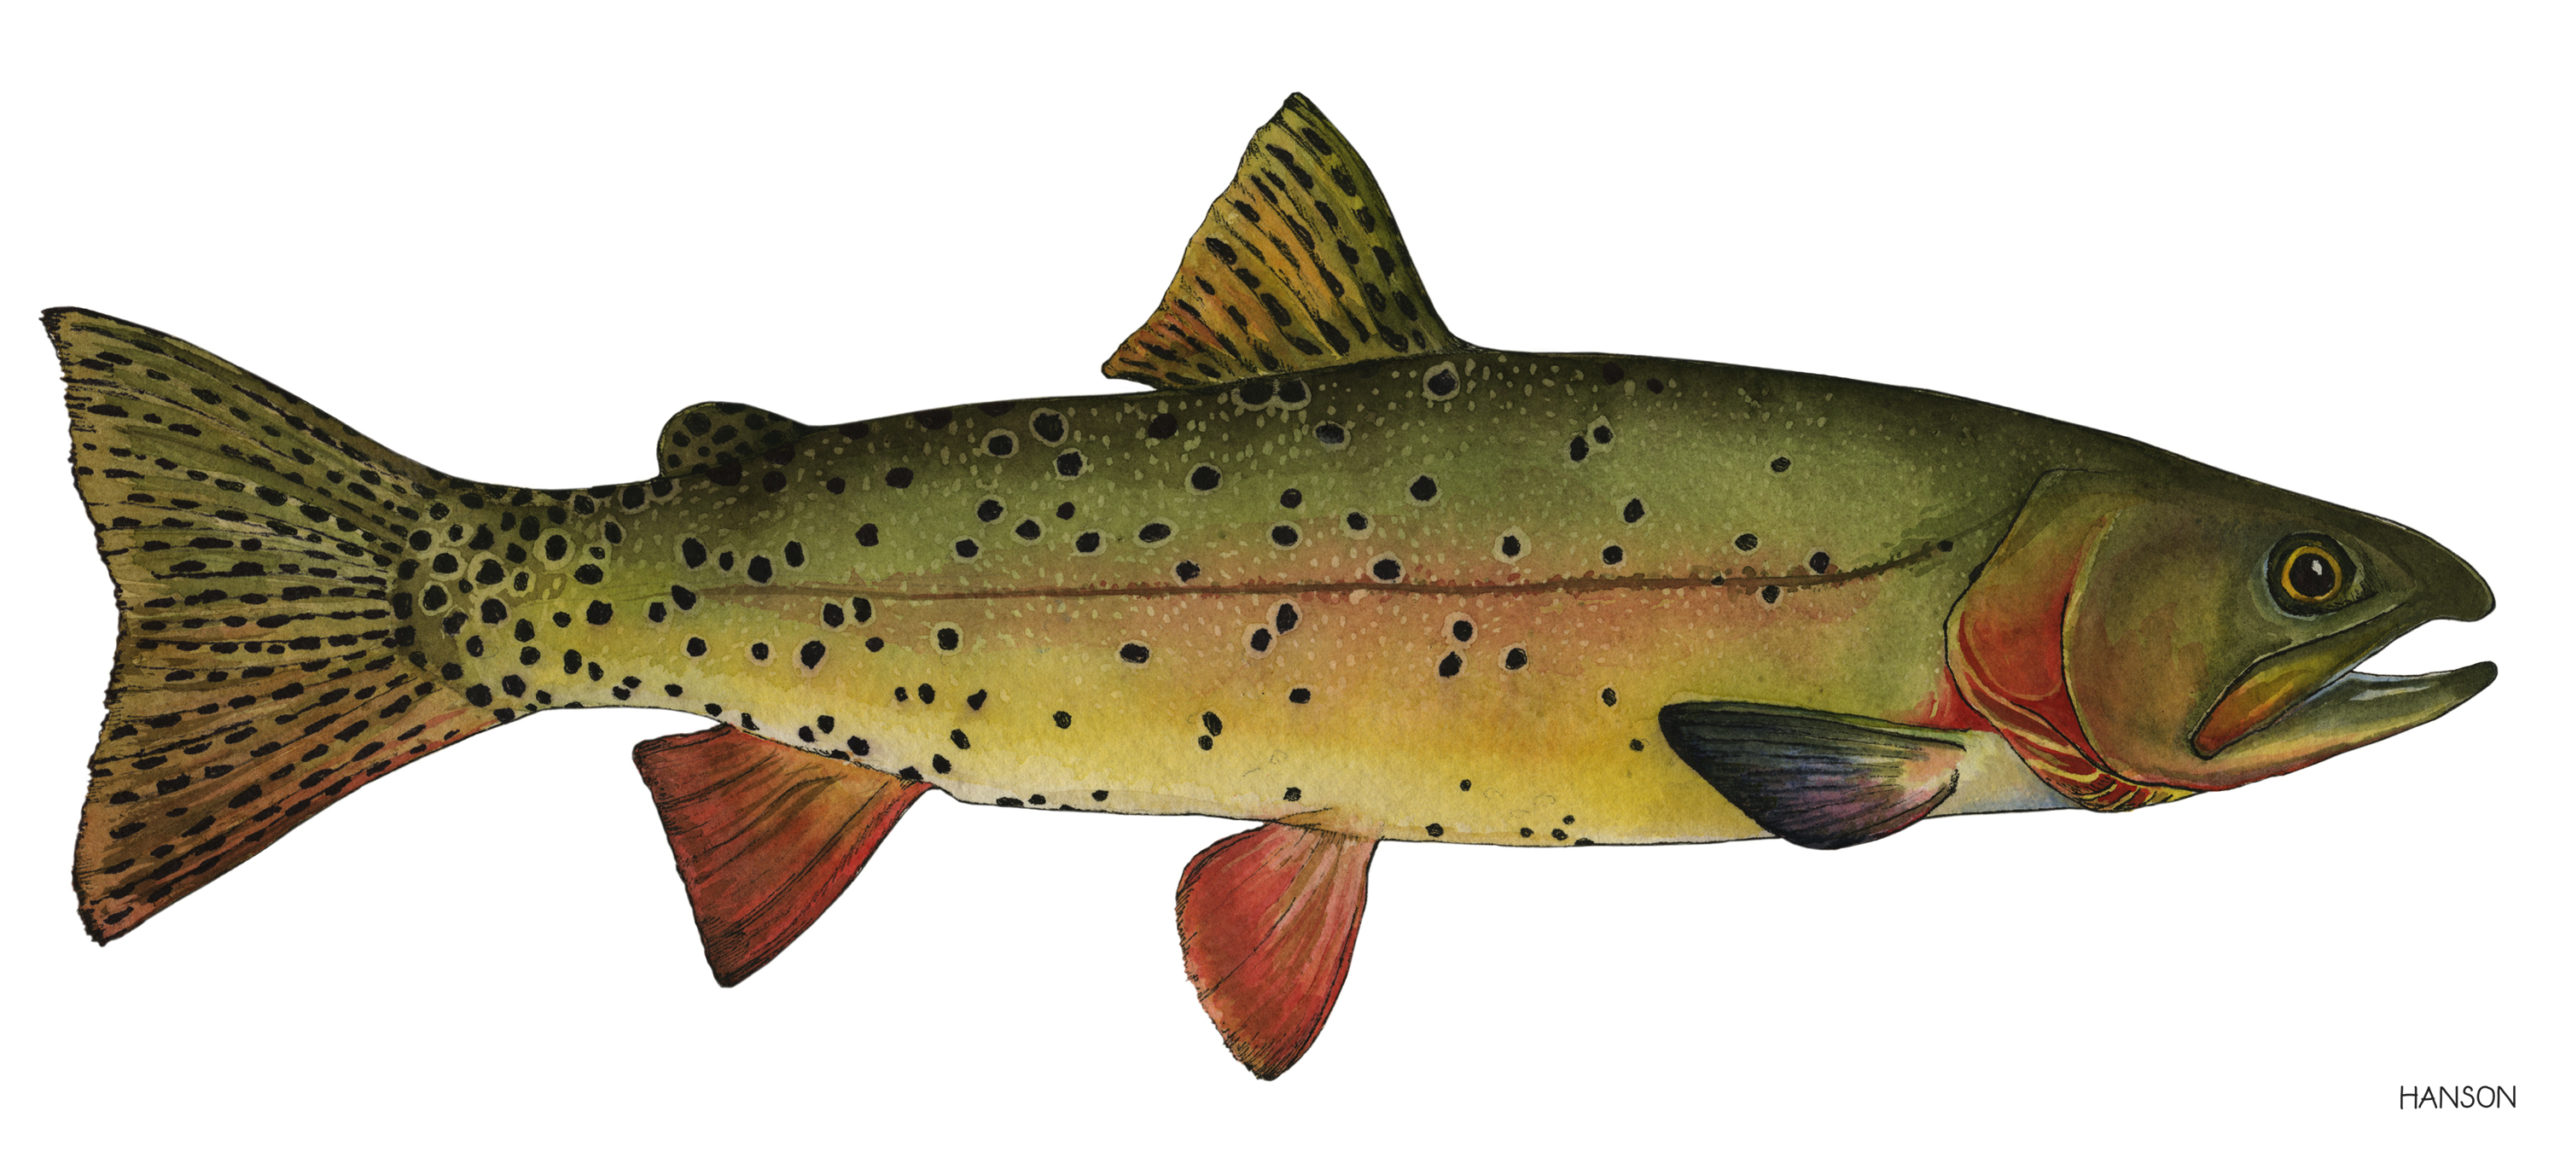 A Symbol of our Region - Yellowstone cutthroat trout